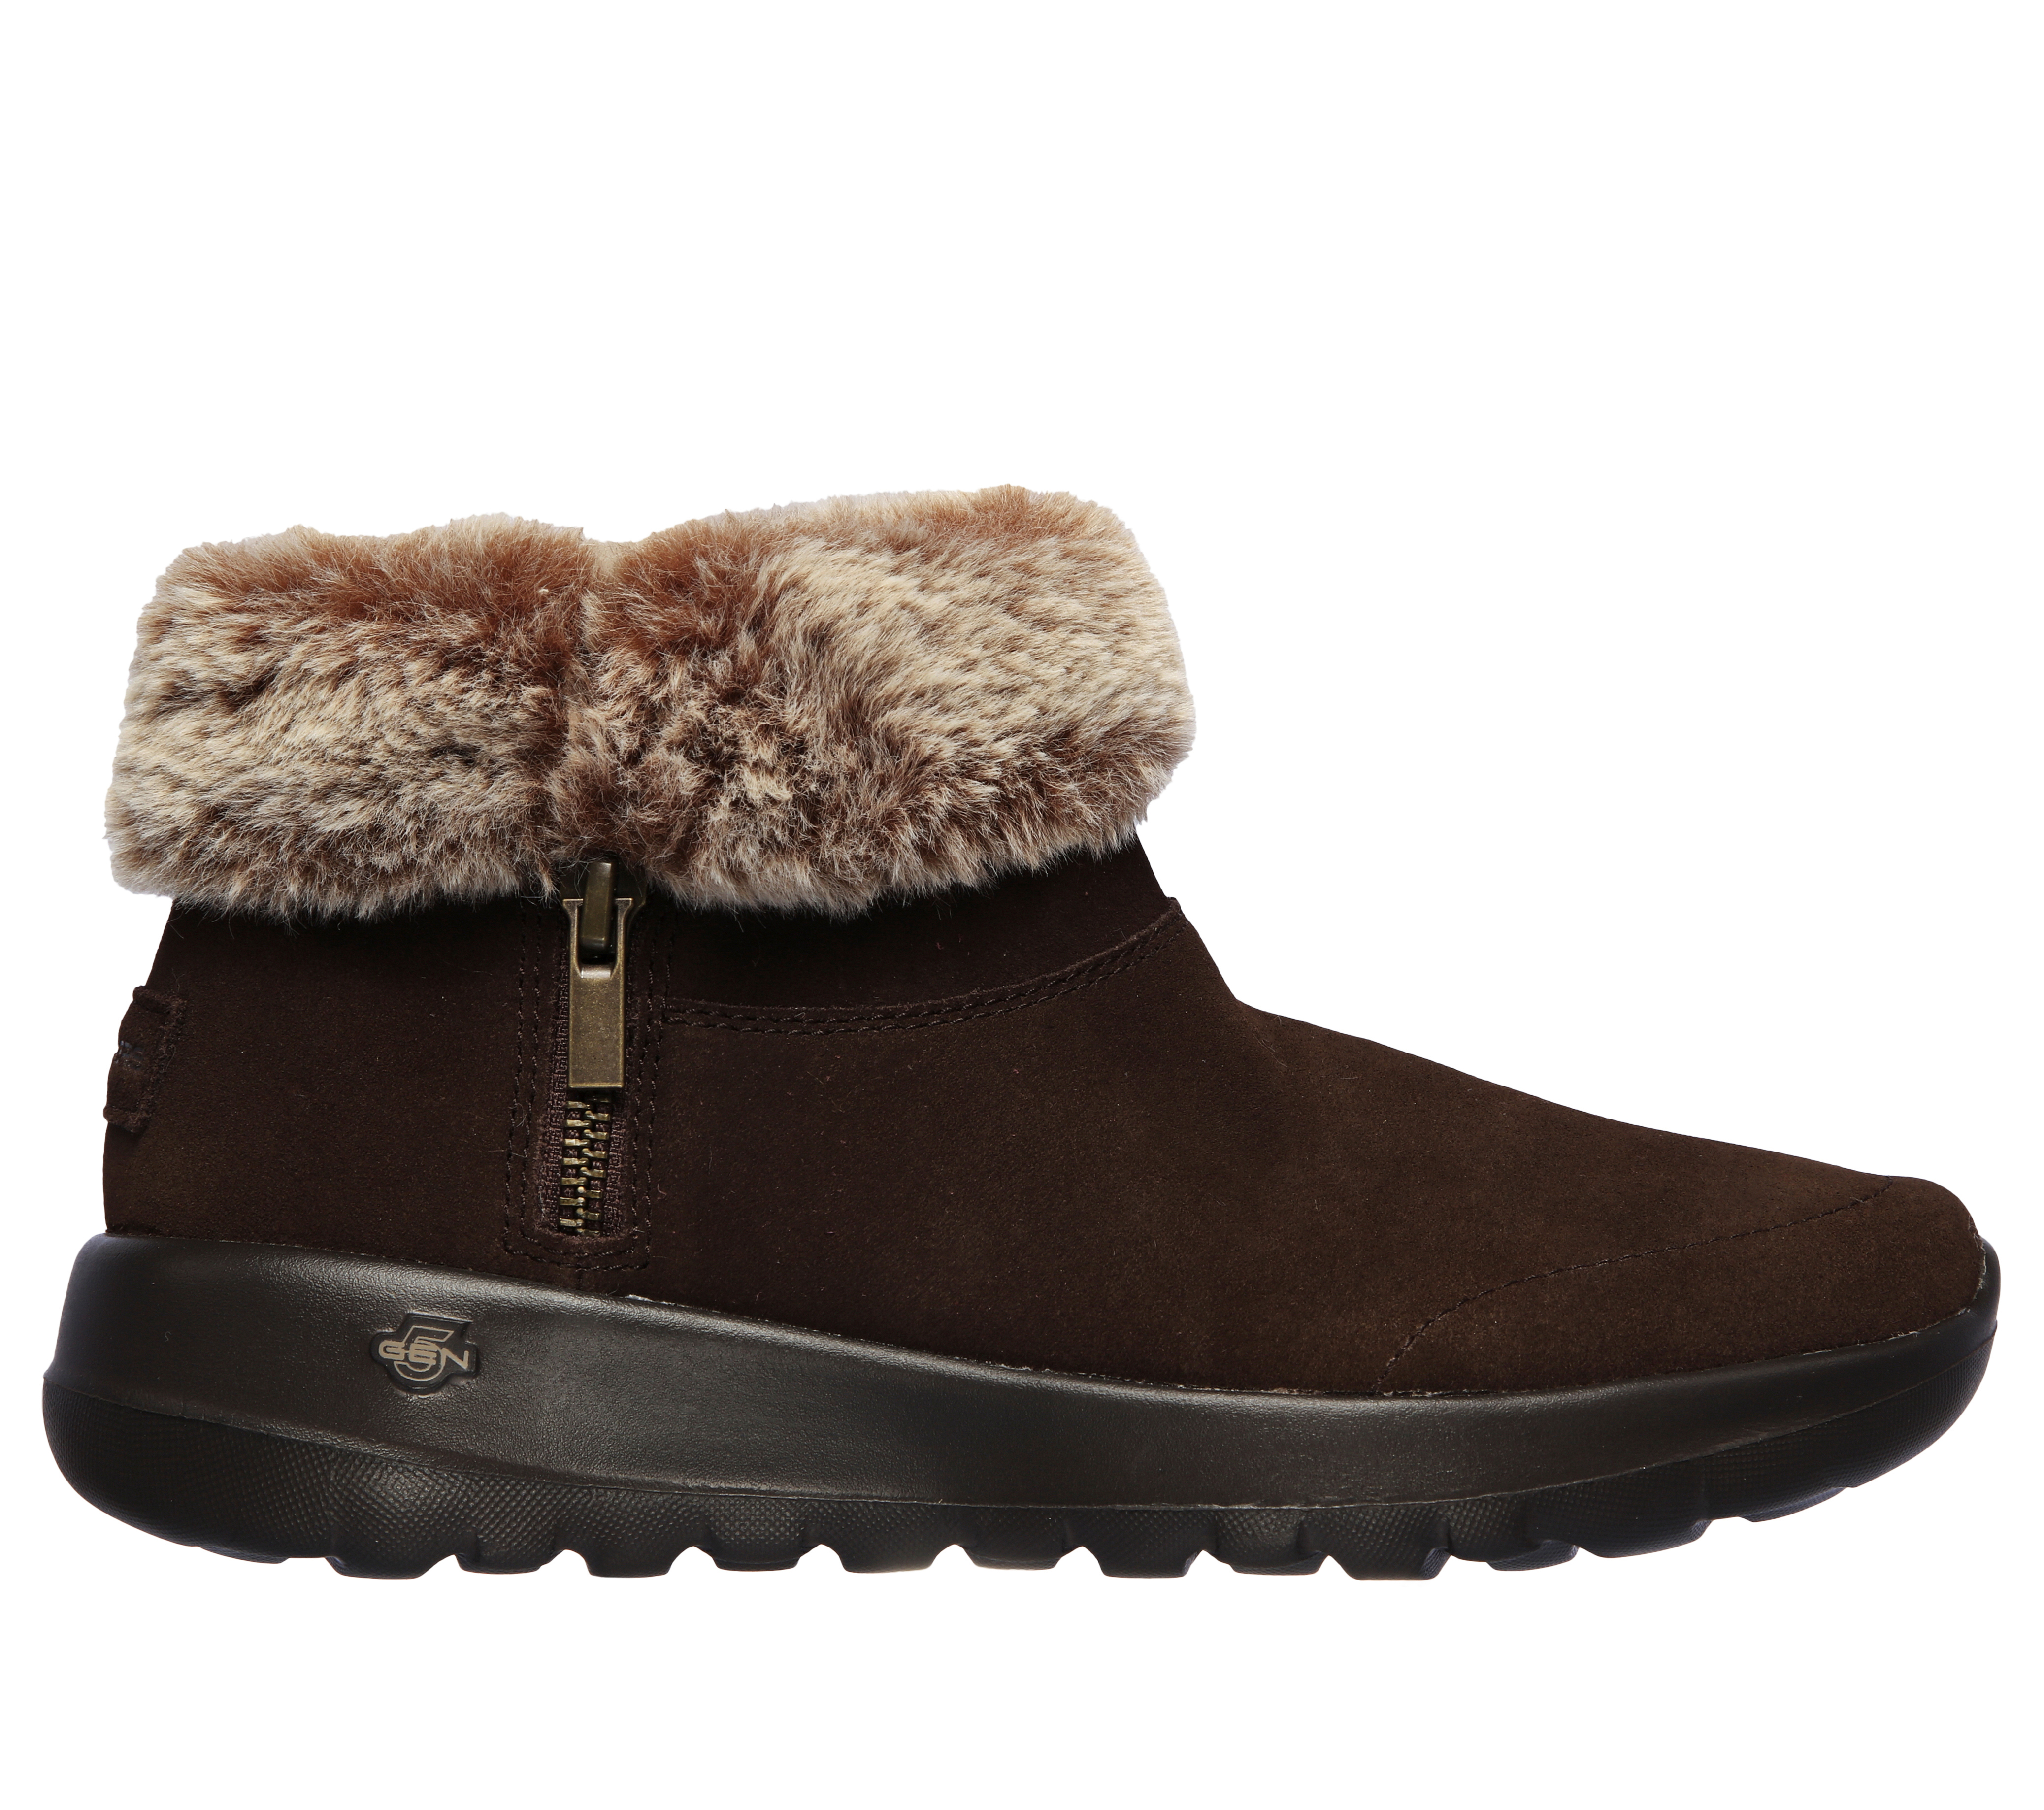 skechers on the go chugga suede ankle boot